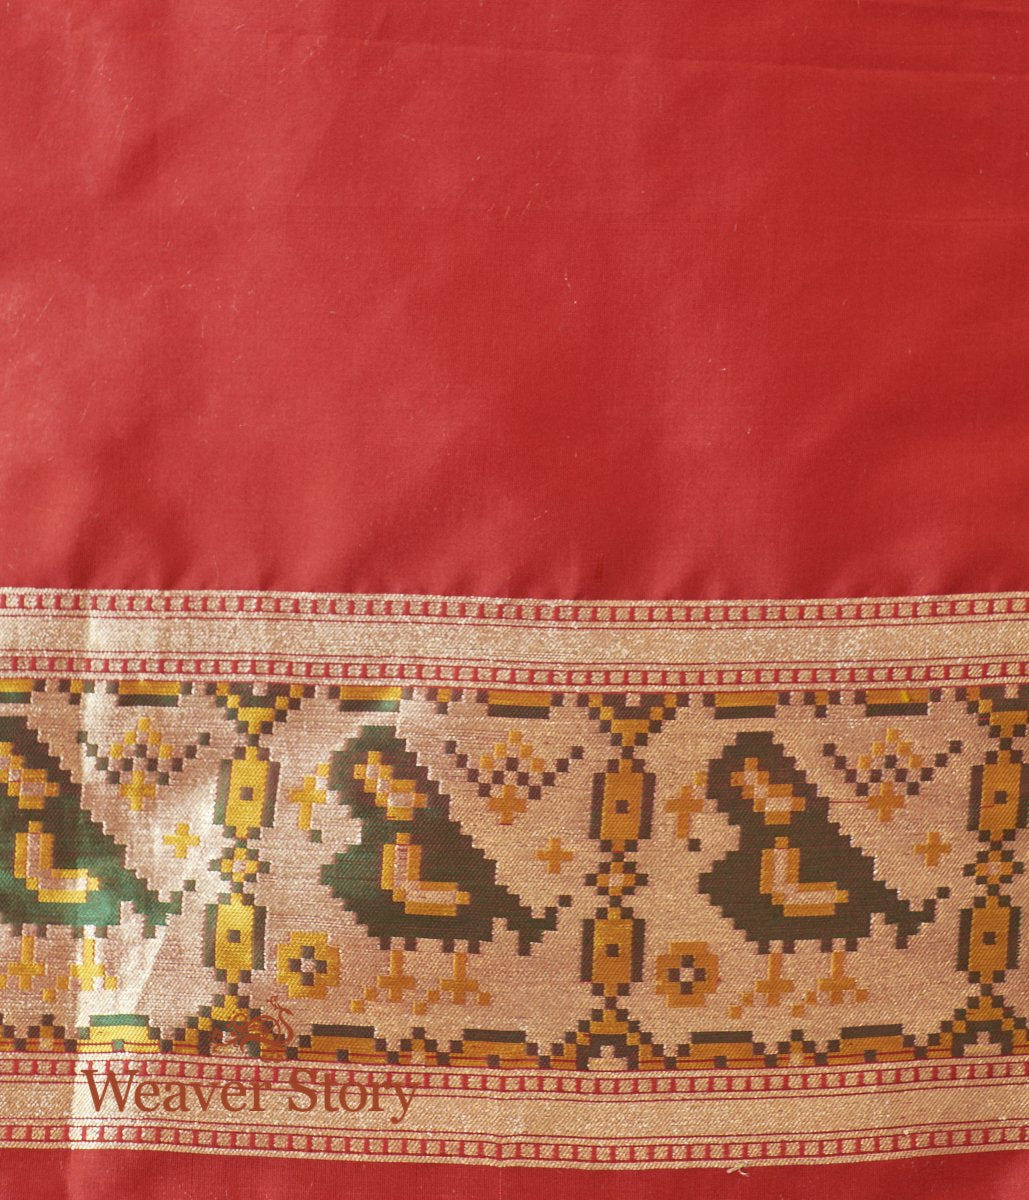 Handwoven_Red_and_Yellow_Meenakari_Patola_Saree_with_Parrots_on_the_Border_WeaverStory_05